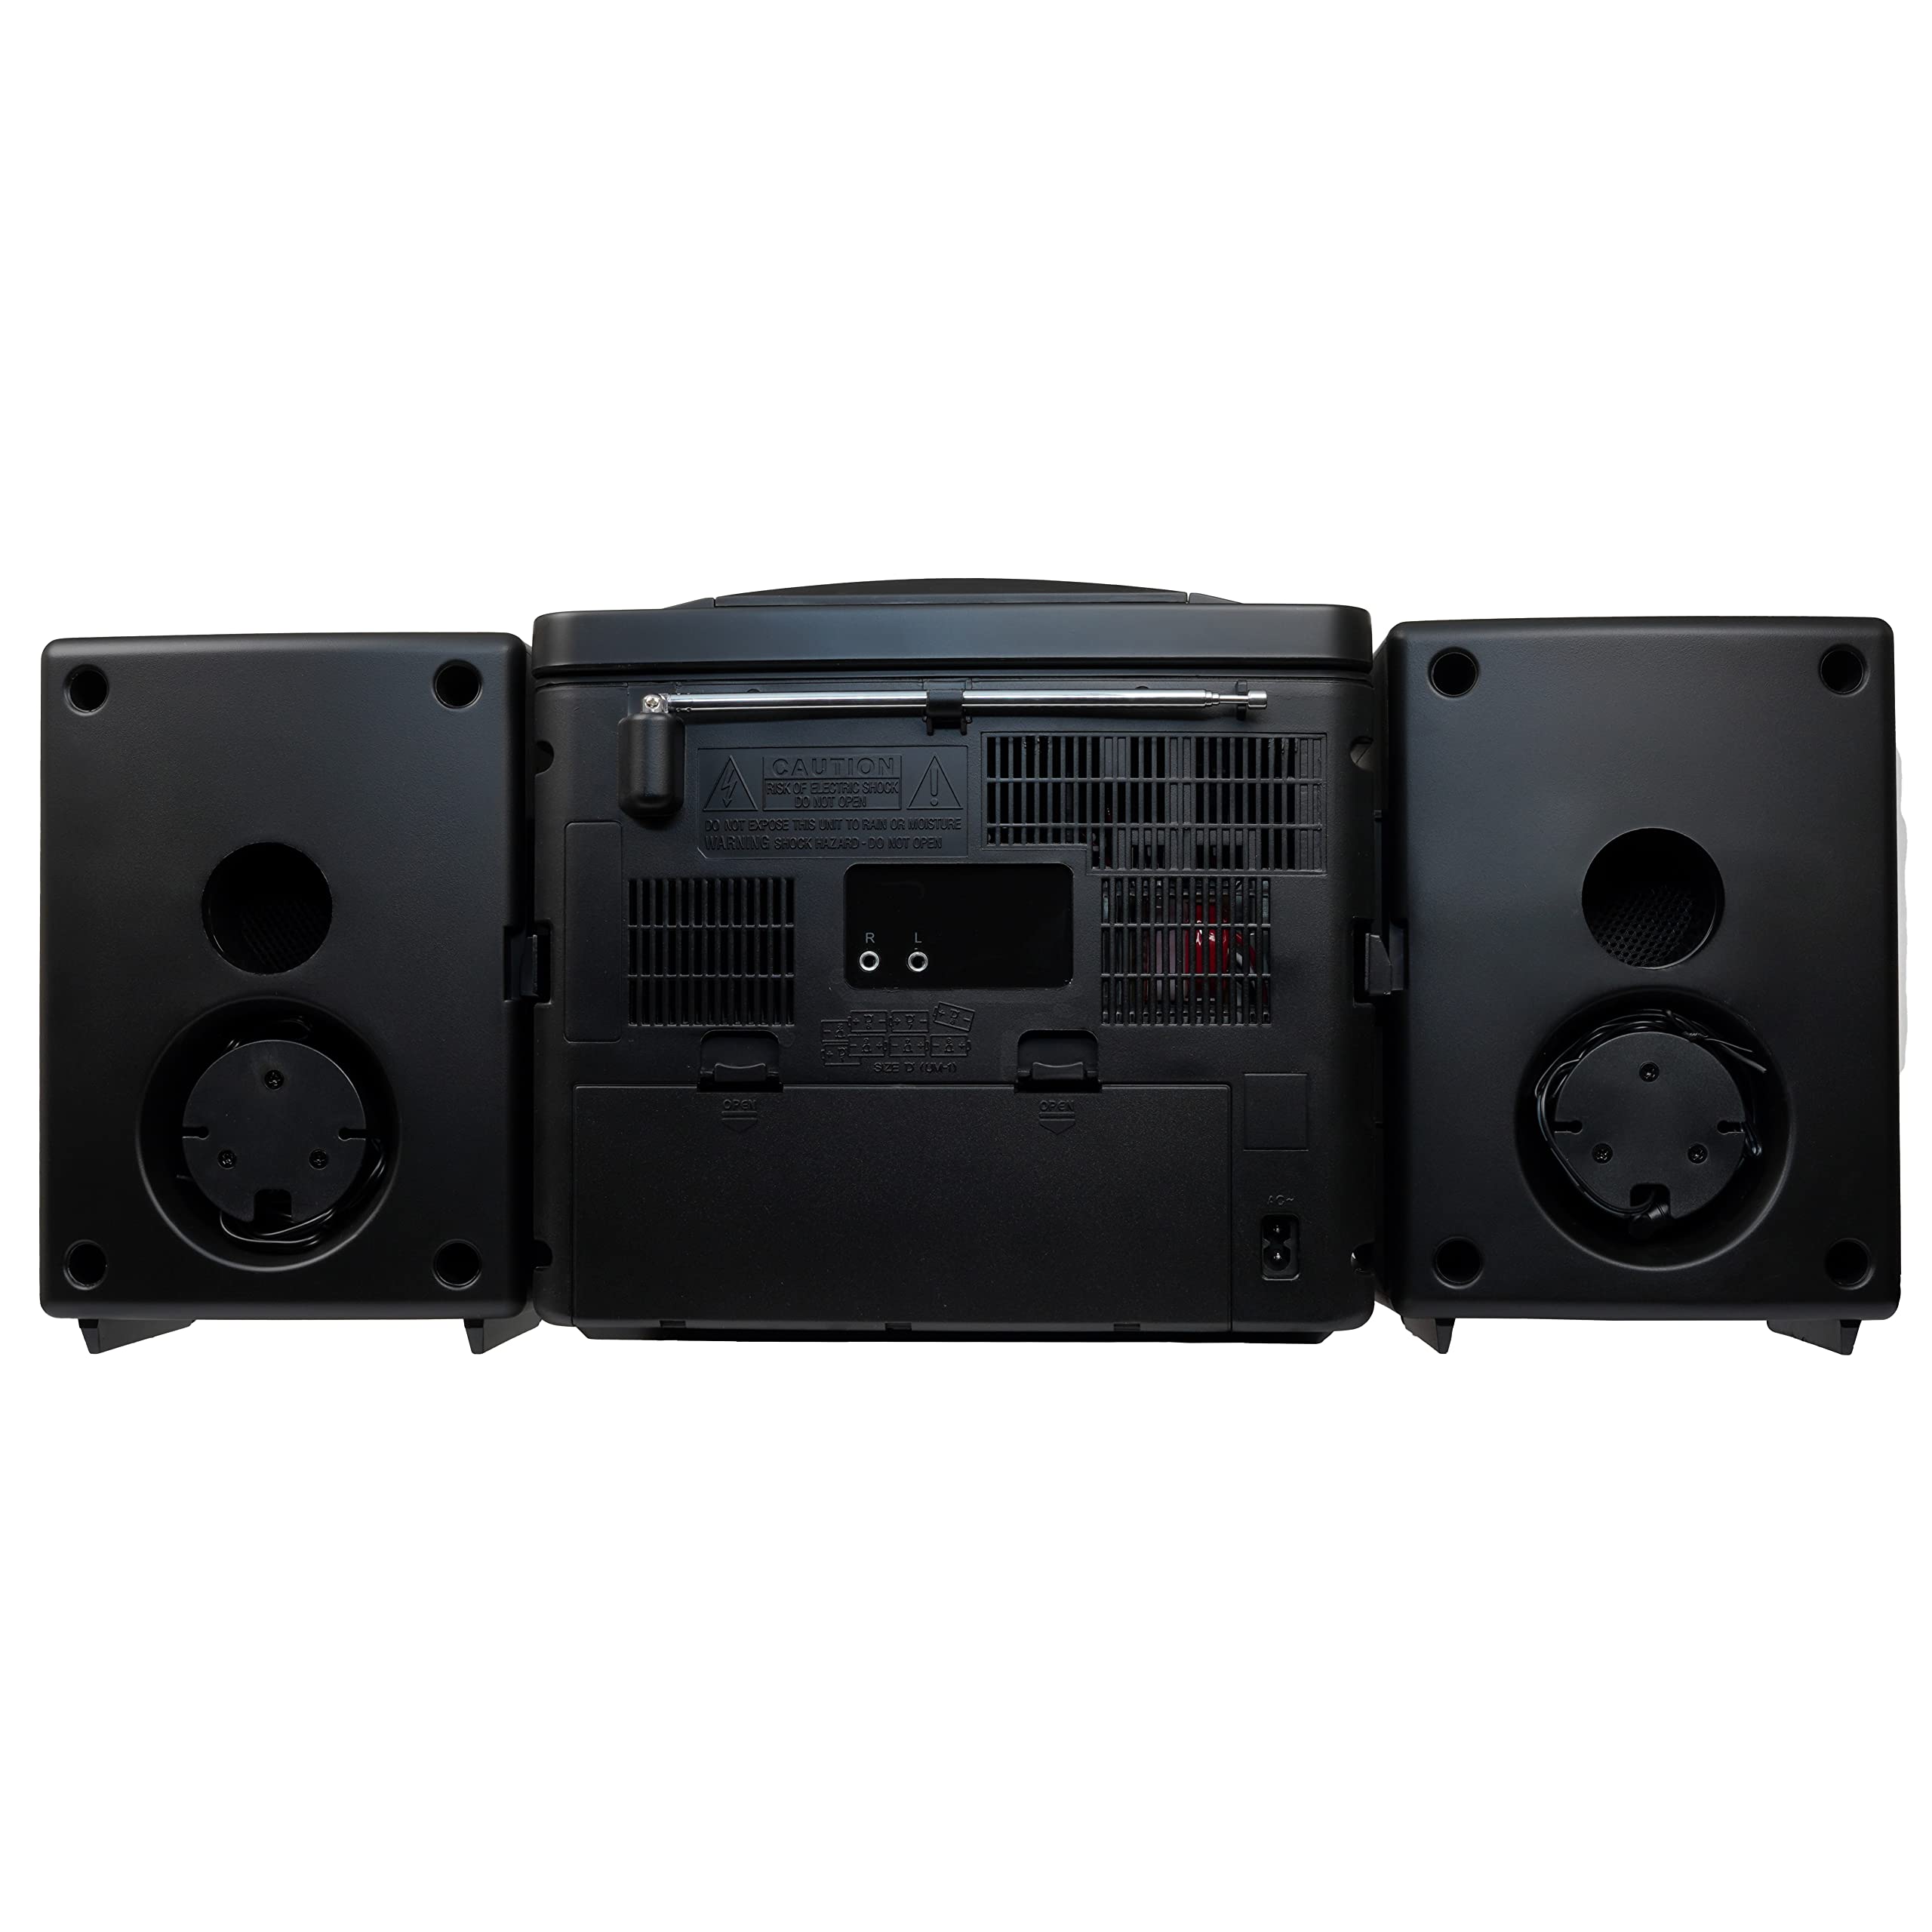 Supersonic Black Edition Vintage Bluetooth Stereo System Home Music Audio System,CD/MP3 Player,AM/FM Radio,Dual Cassette Player/Rec USB inputs,Detachable Speakers,AC/DC,(Remote Included)Matte Black